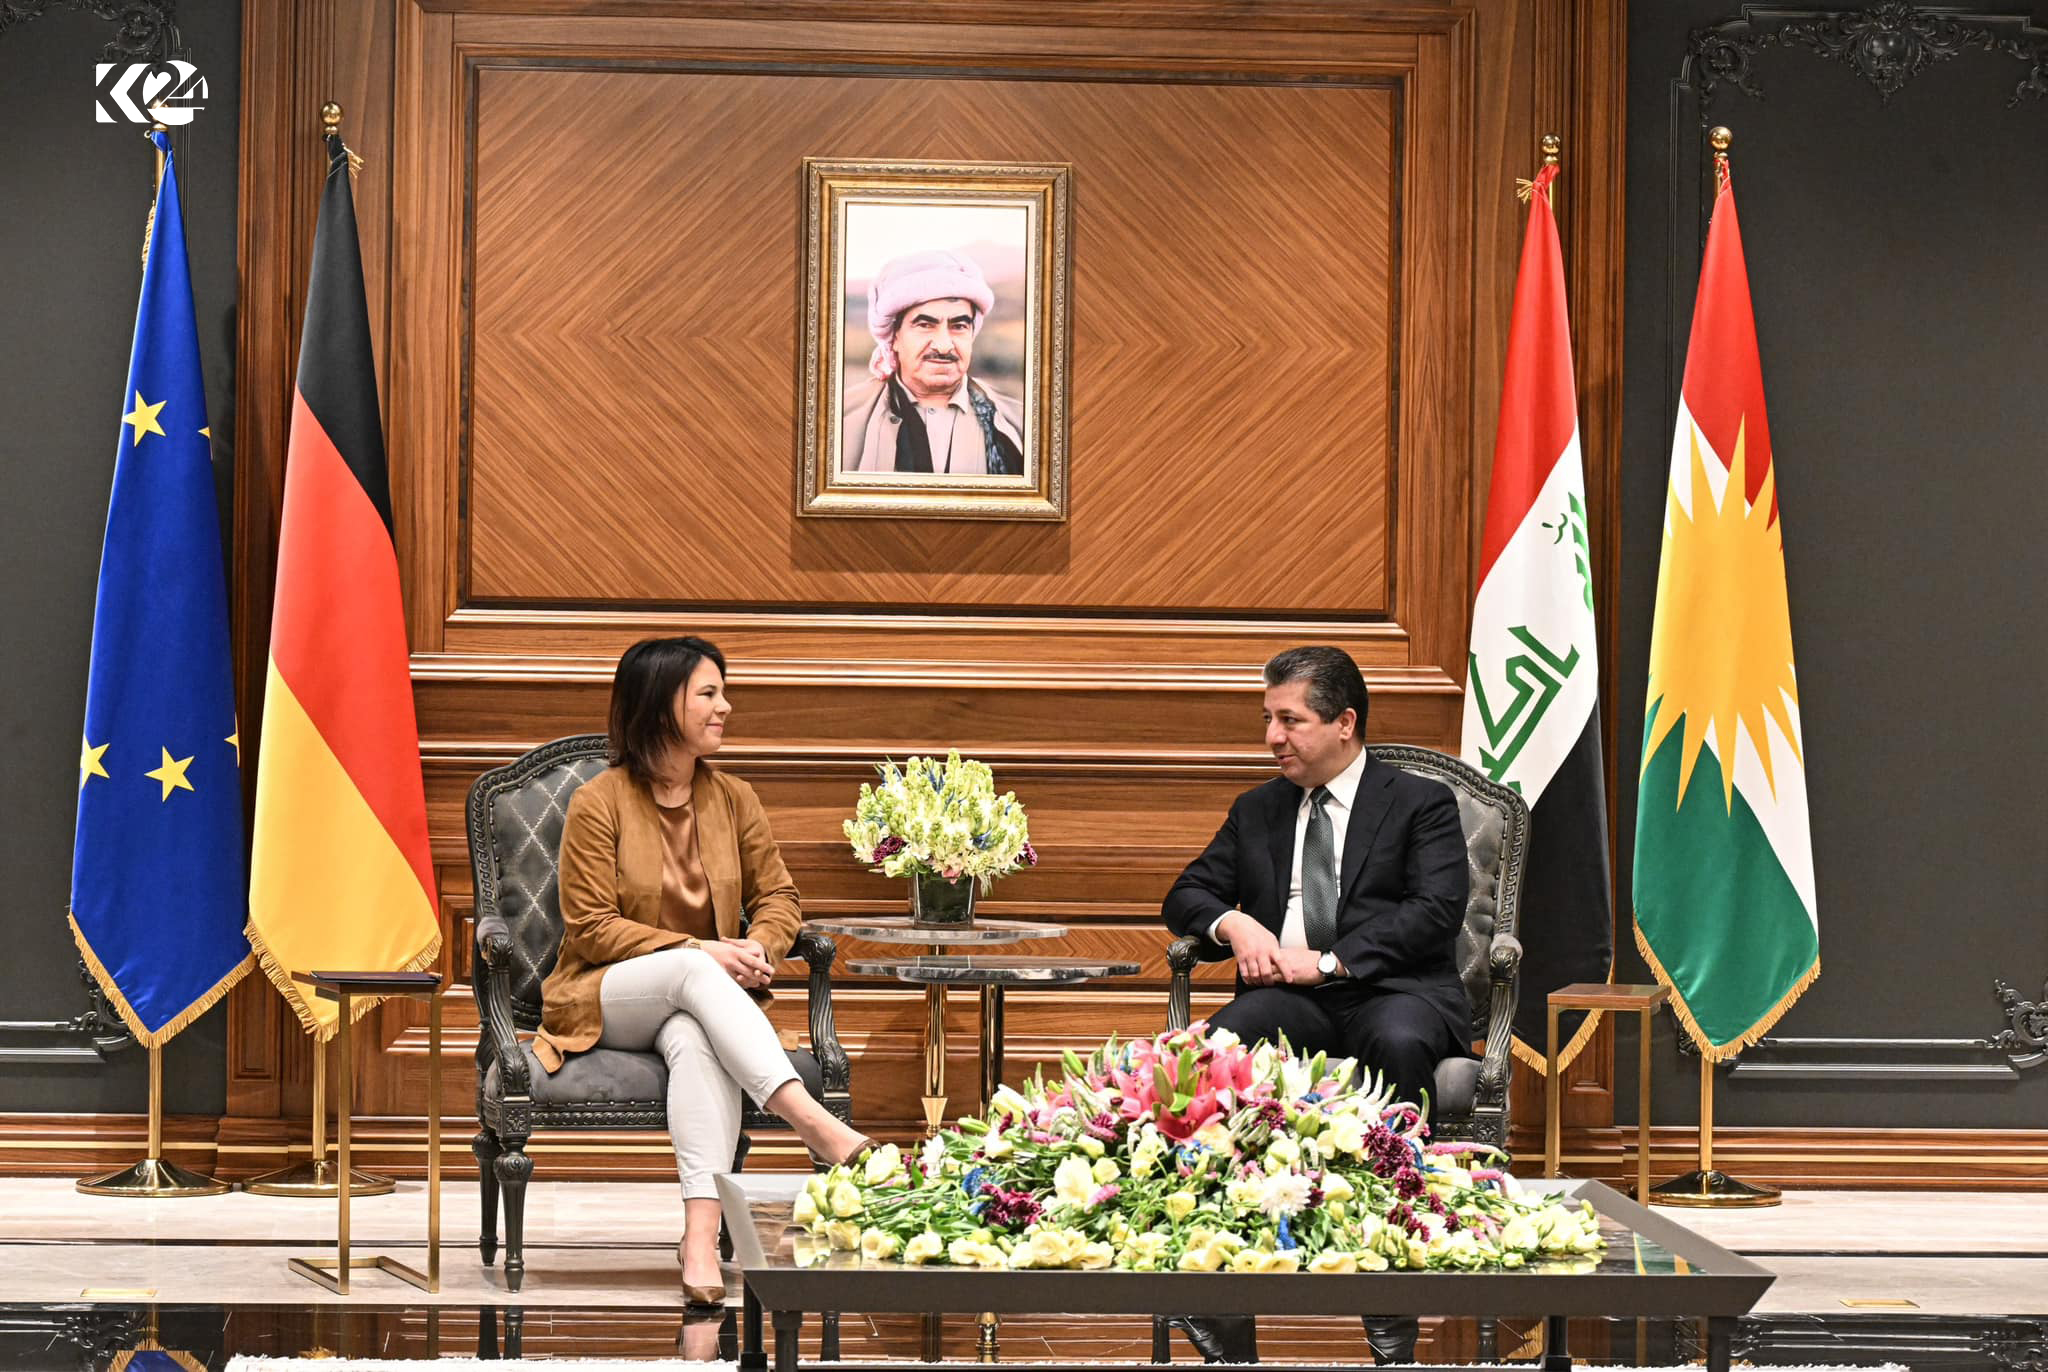 Kurdistan Region Prime Minister Masrour Barzani (right) during his meeting with German Minister for Foreign Affairs Annalena Baerbock in Erbil, March 8, 2023. (Photo: KRG)